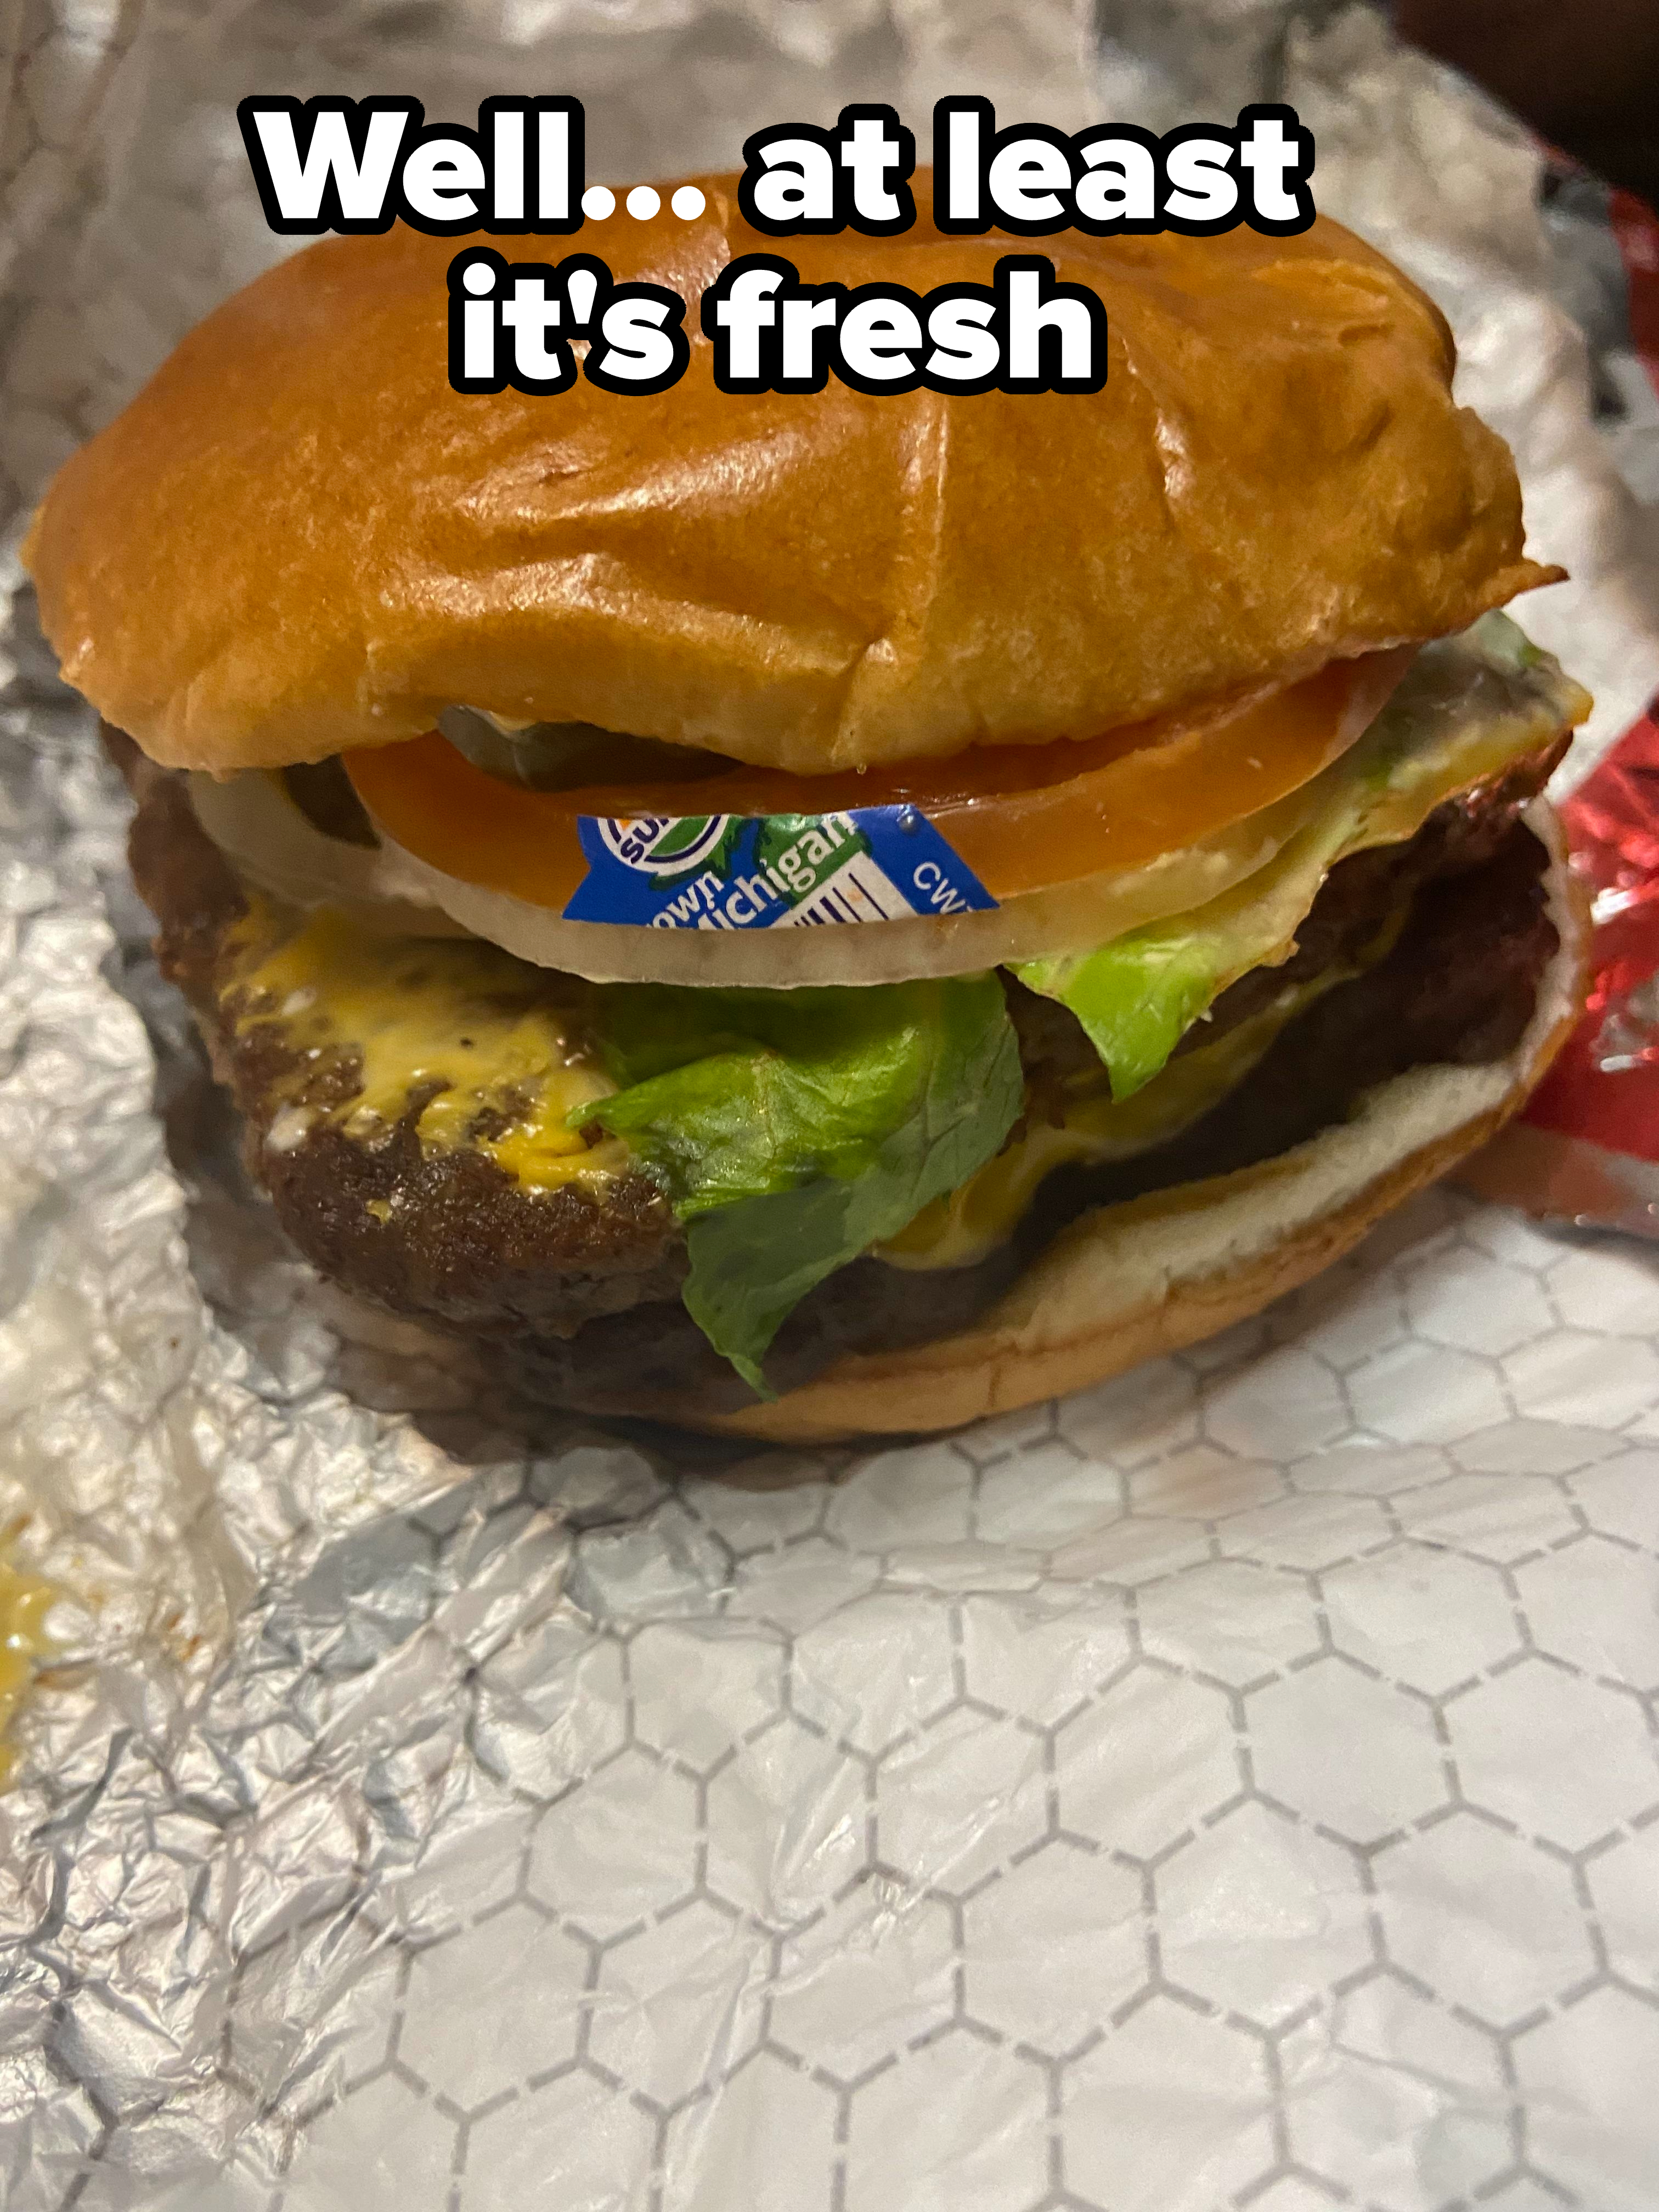 Cheeseburger with lettuce, tomato, and a sticker accidentally left on the cheese